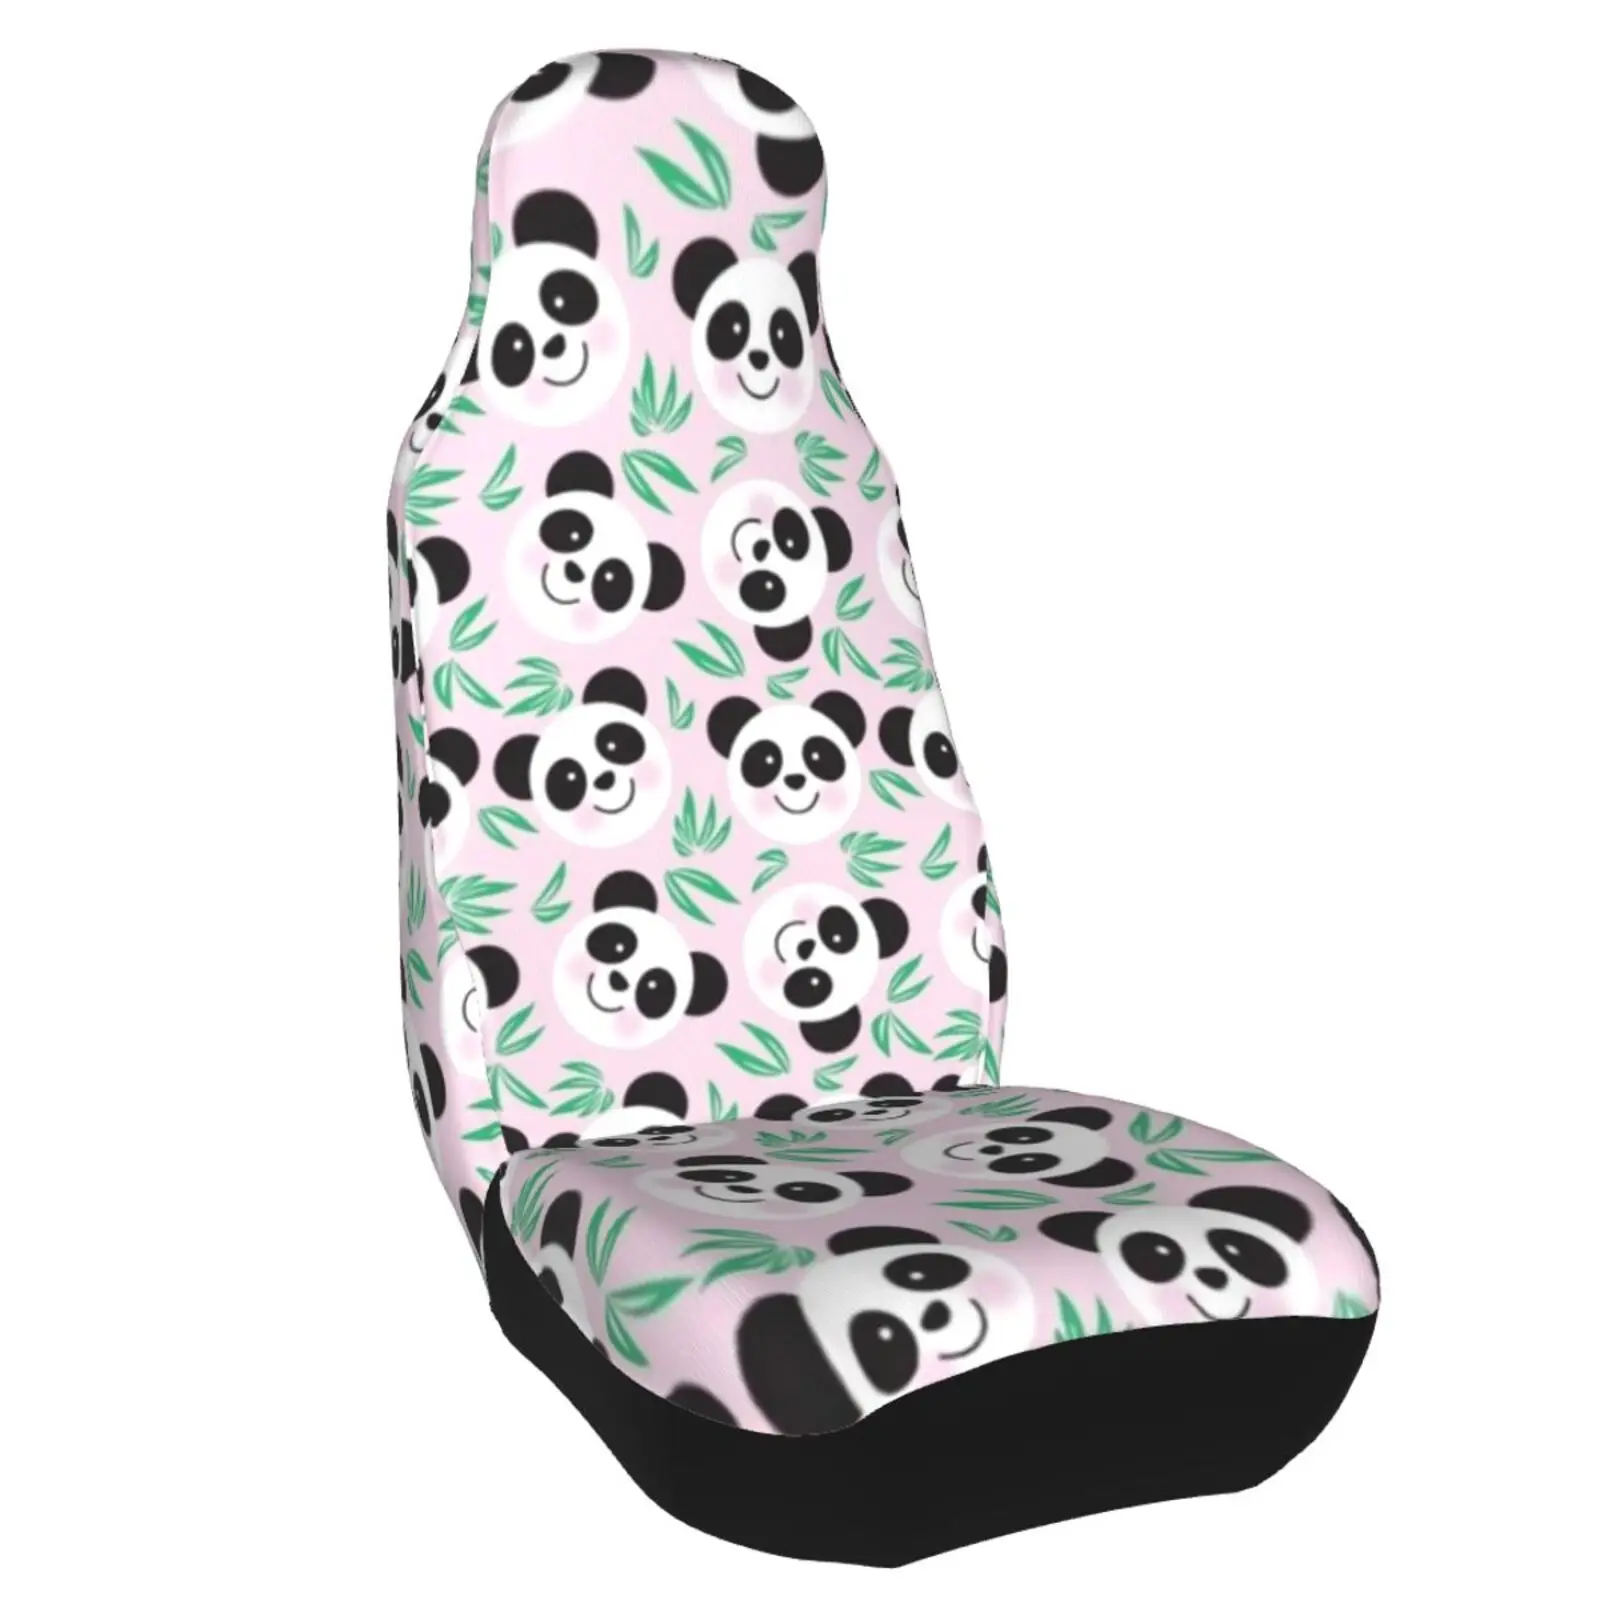 1/2 PCS Universal Protector Car Seat Cover Front Back 3D Cute Animal Panda Car Seat Belt Cover Padding Auto Toyota